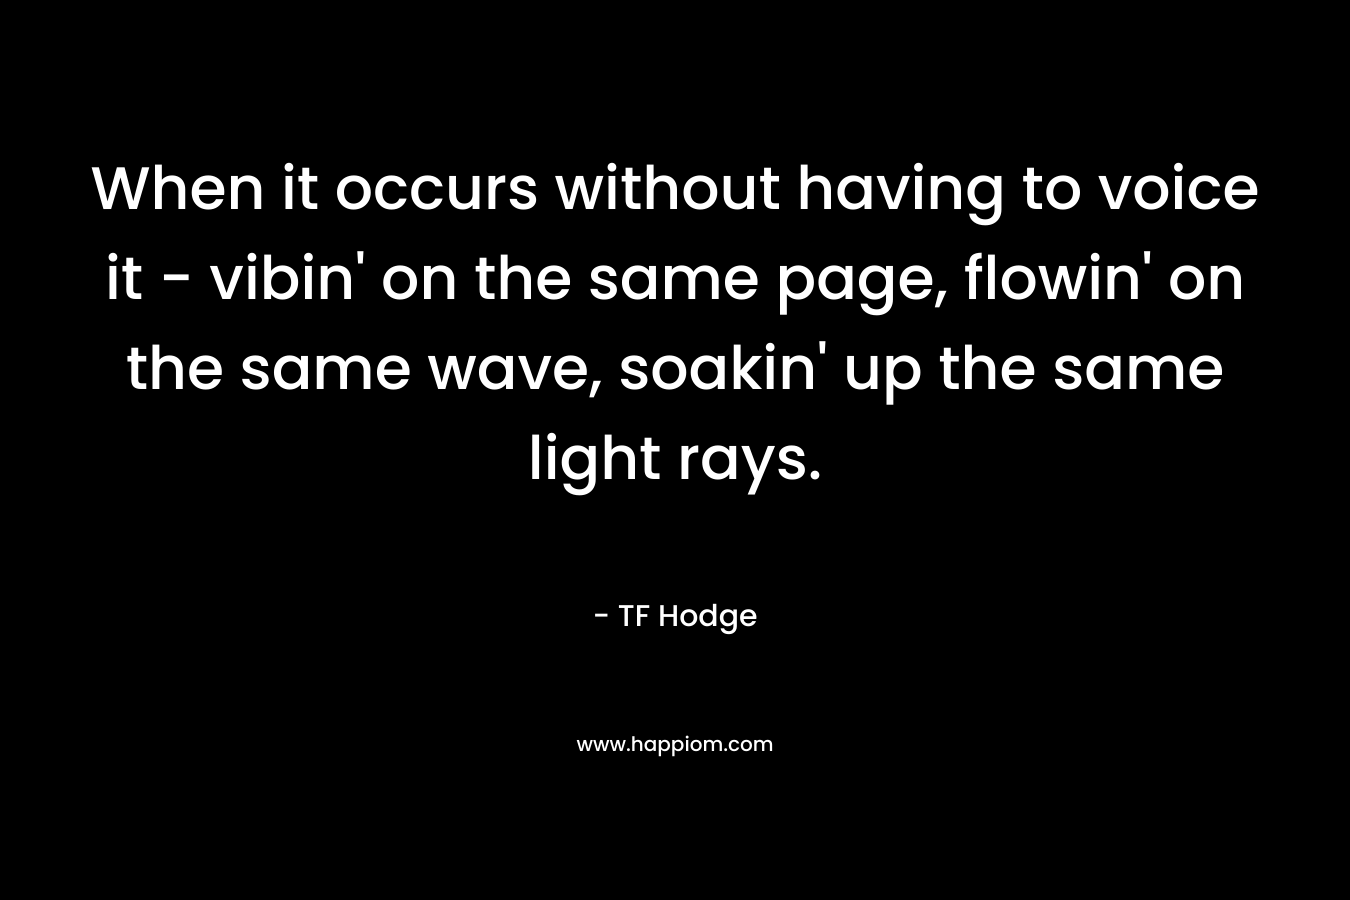 When it occurs without having to voice it – vibin’ on the same page, flowin’ on the same wave, soakin’ up the same light rays. – TF Hodge